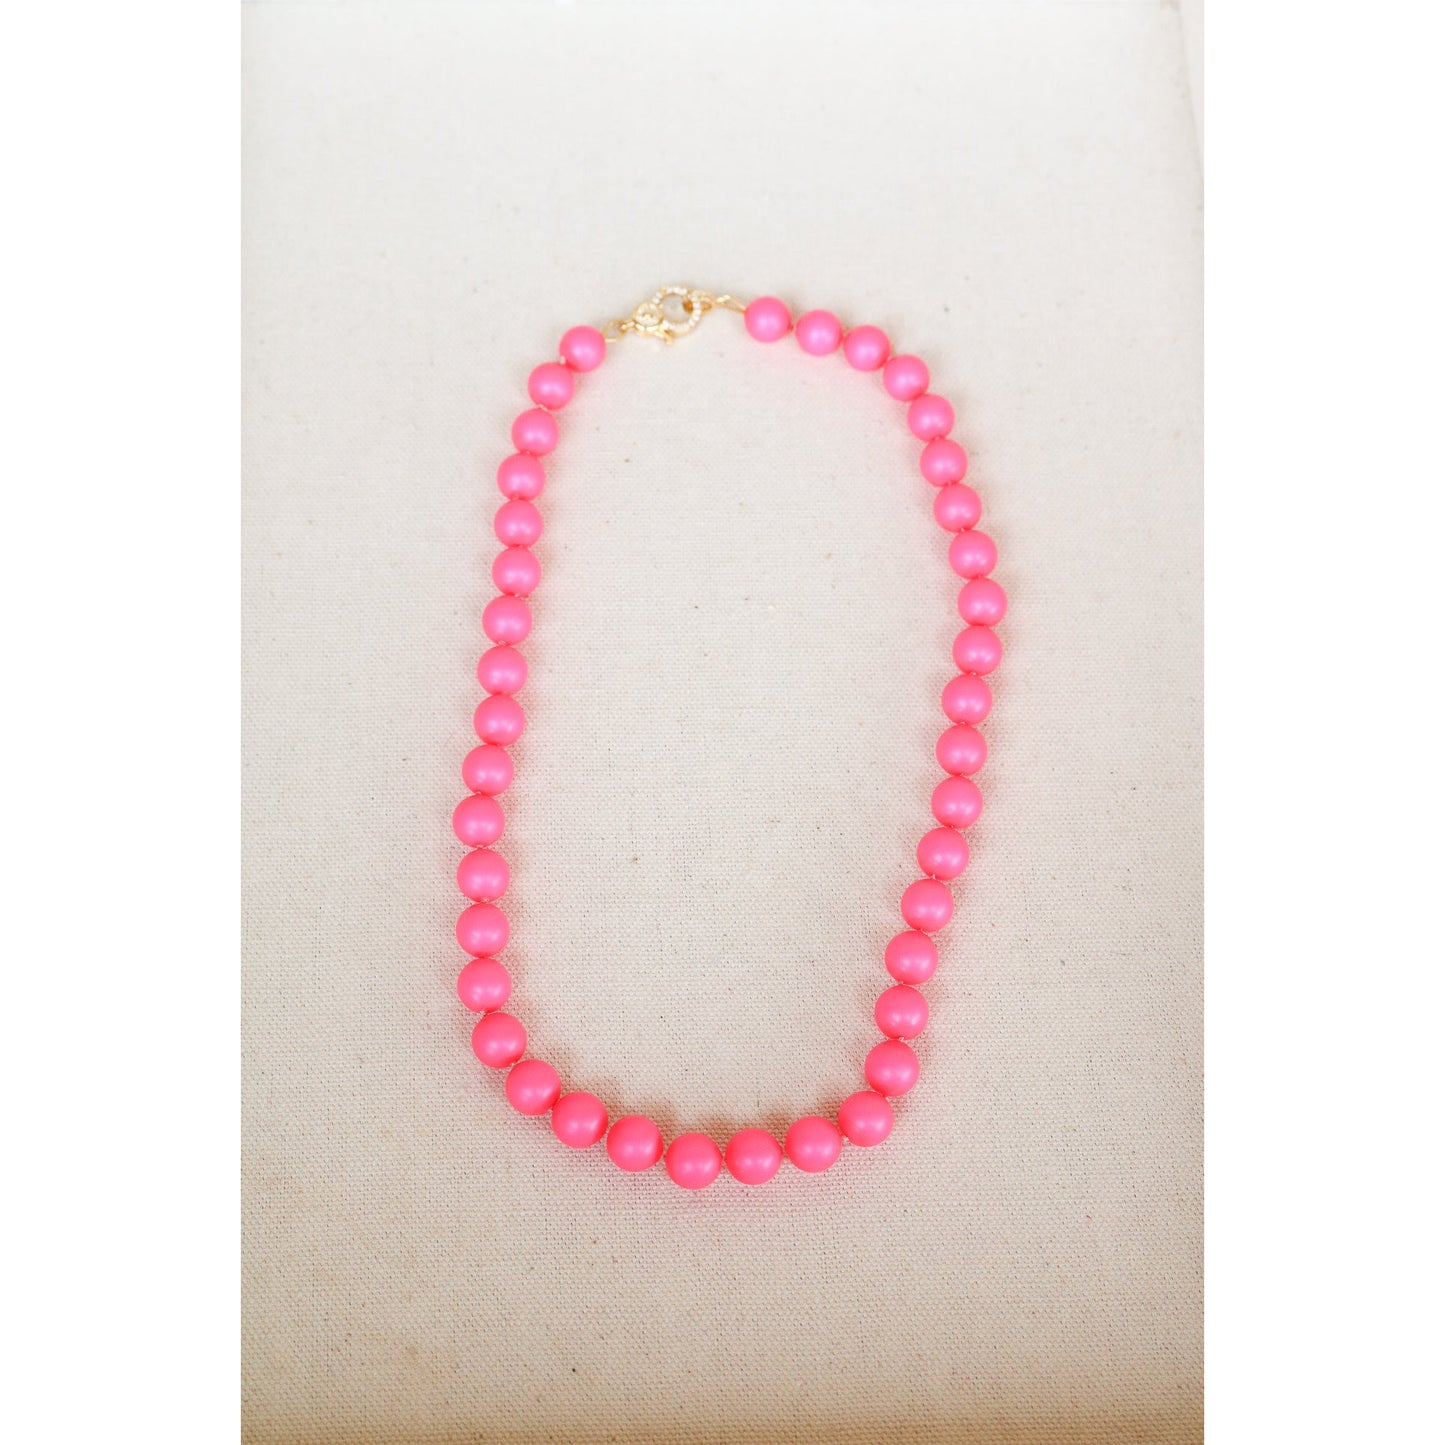 Neon Swarovski Pearl Hand Knotted Necklace